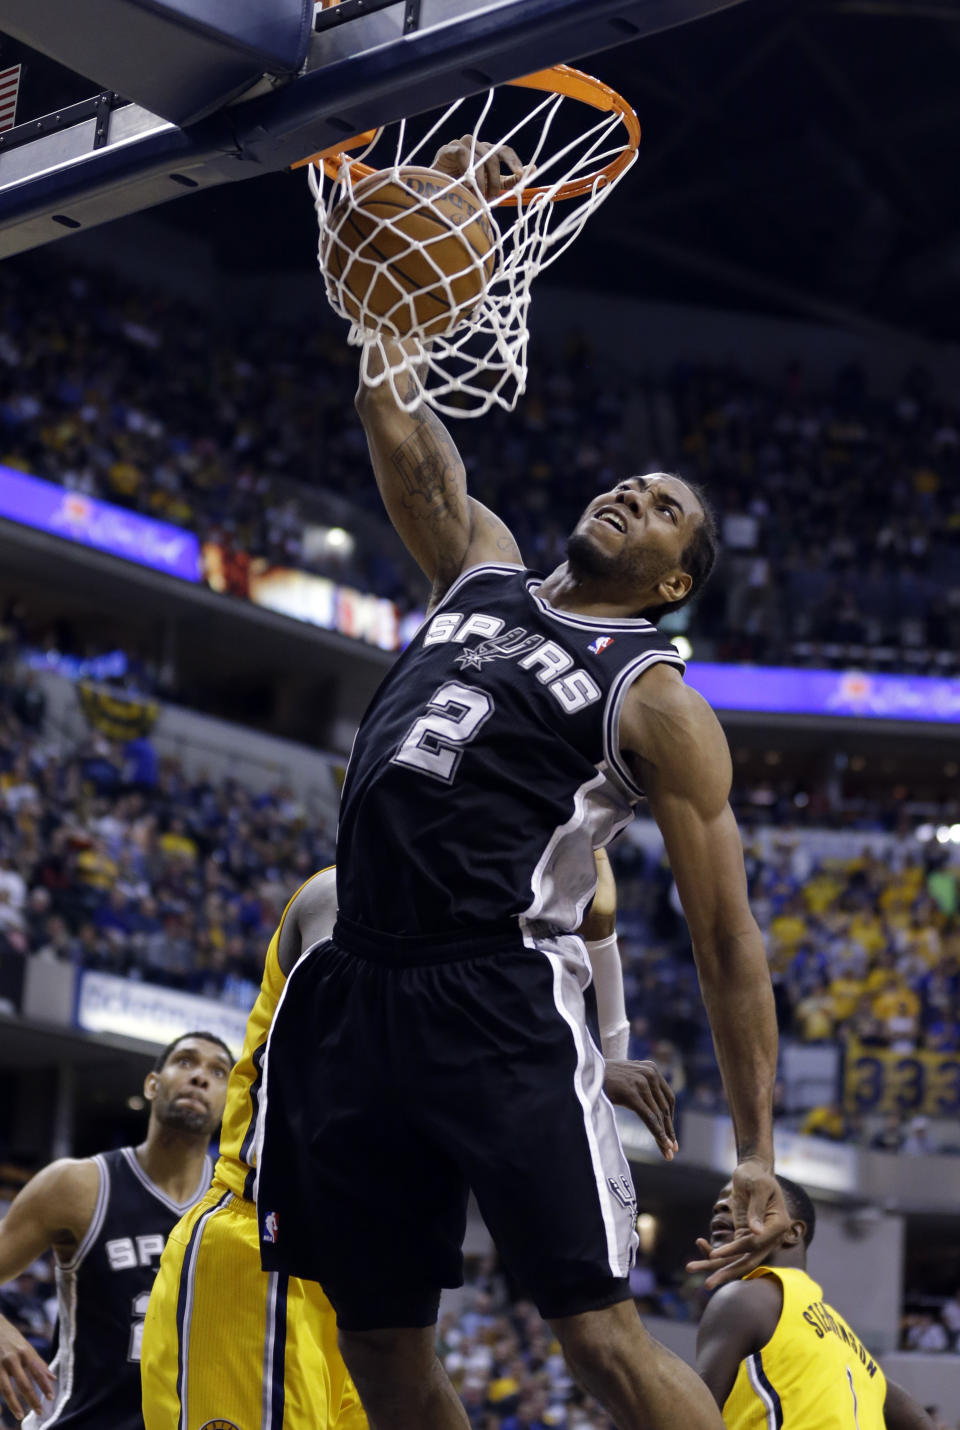 San Antonio Spurs forward Kawhi Leonard gets a dunk against the Indiana Pacers in the second half of an NBA basketball game in Indianapolis, Monday, March 31, 2014. The Spurs defeated the Pacers 103-77. (AP Photo/Michael Conroy)